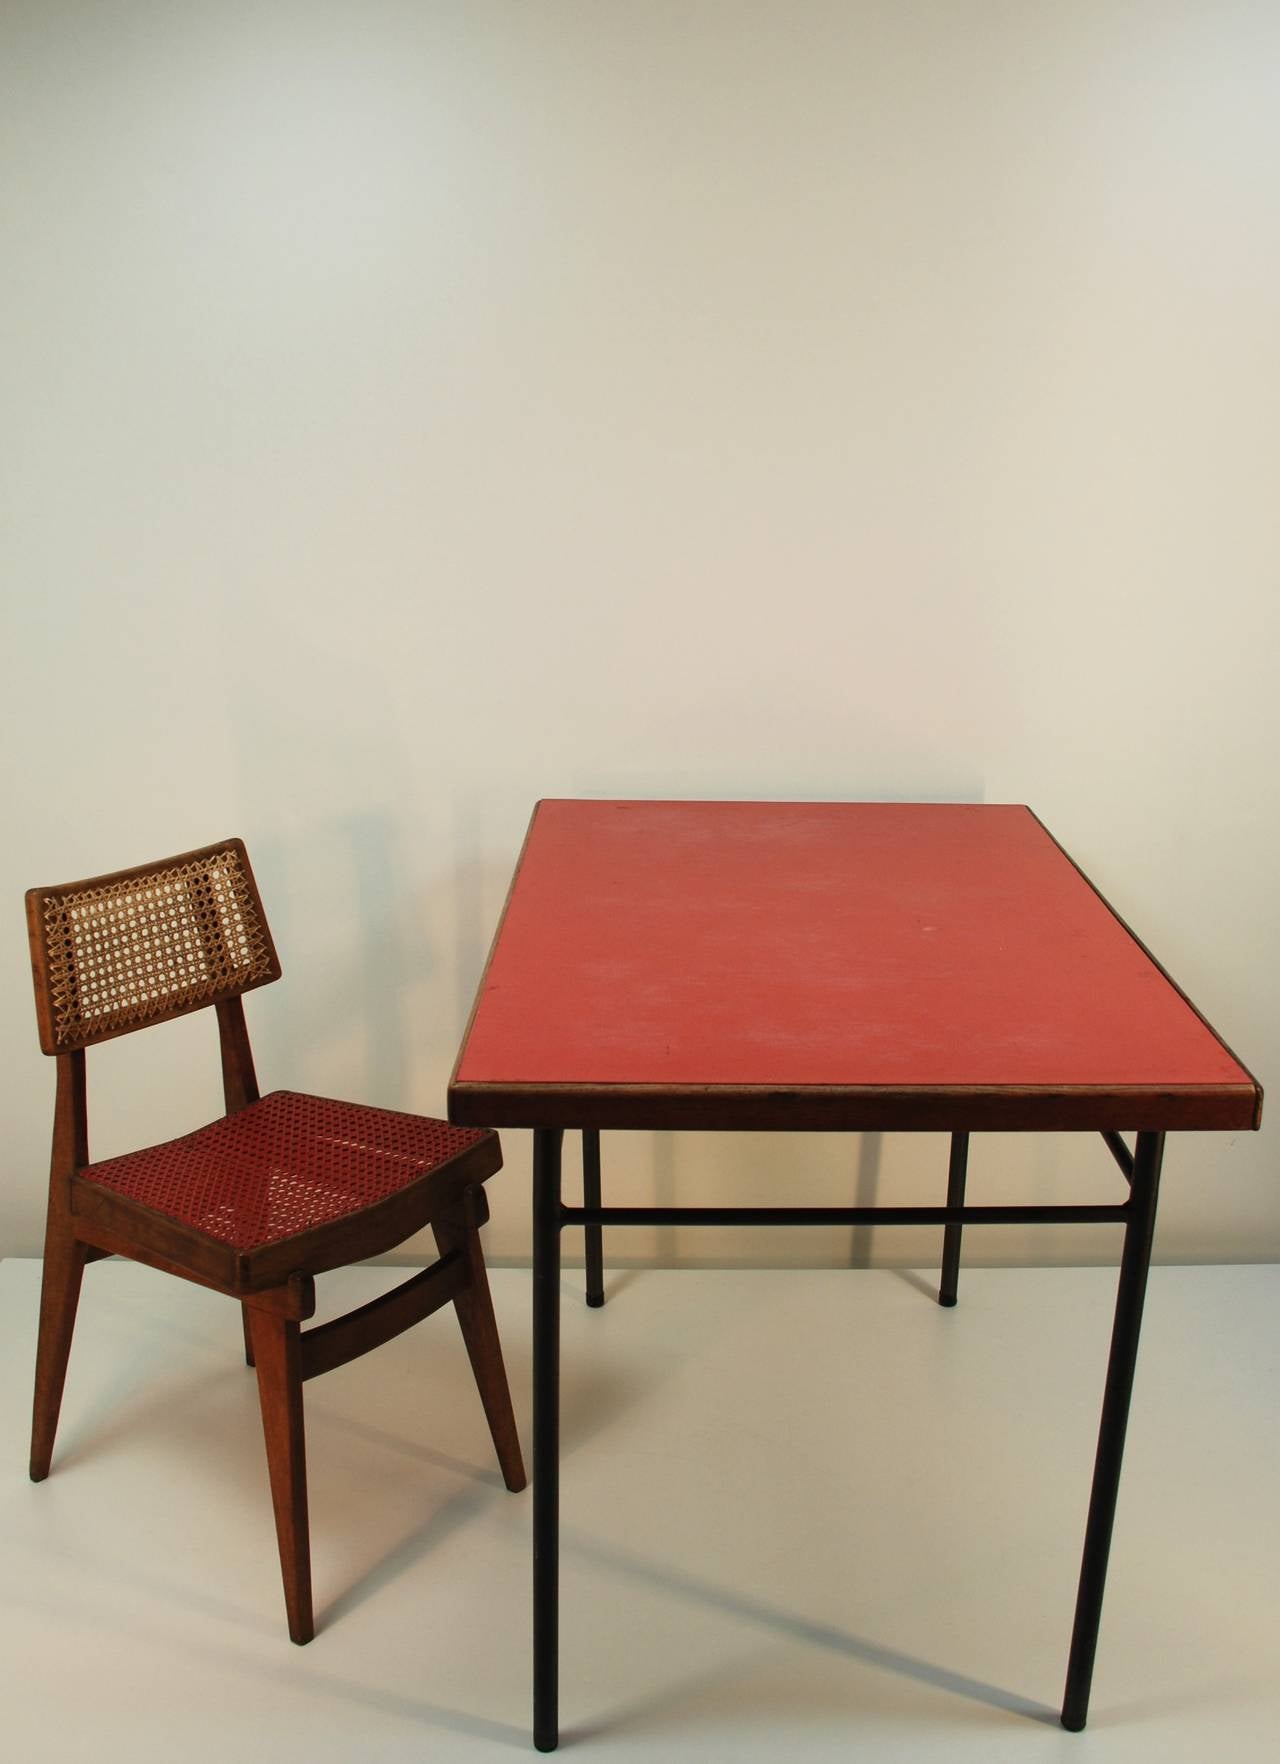 French table and chair, in style of Marcel Gascoin 1950's.

Execution: unknown